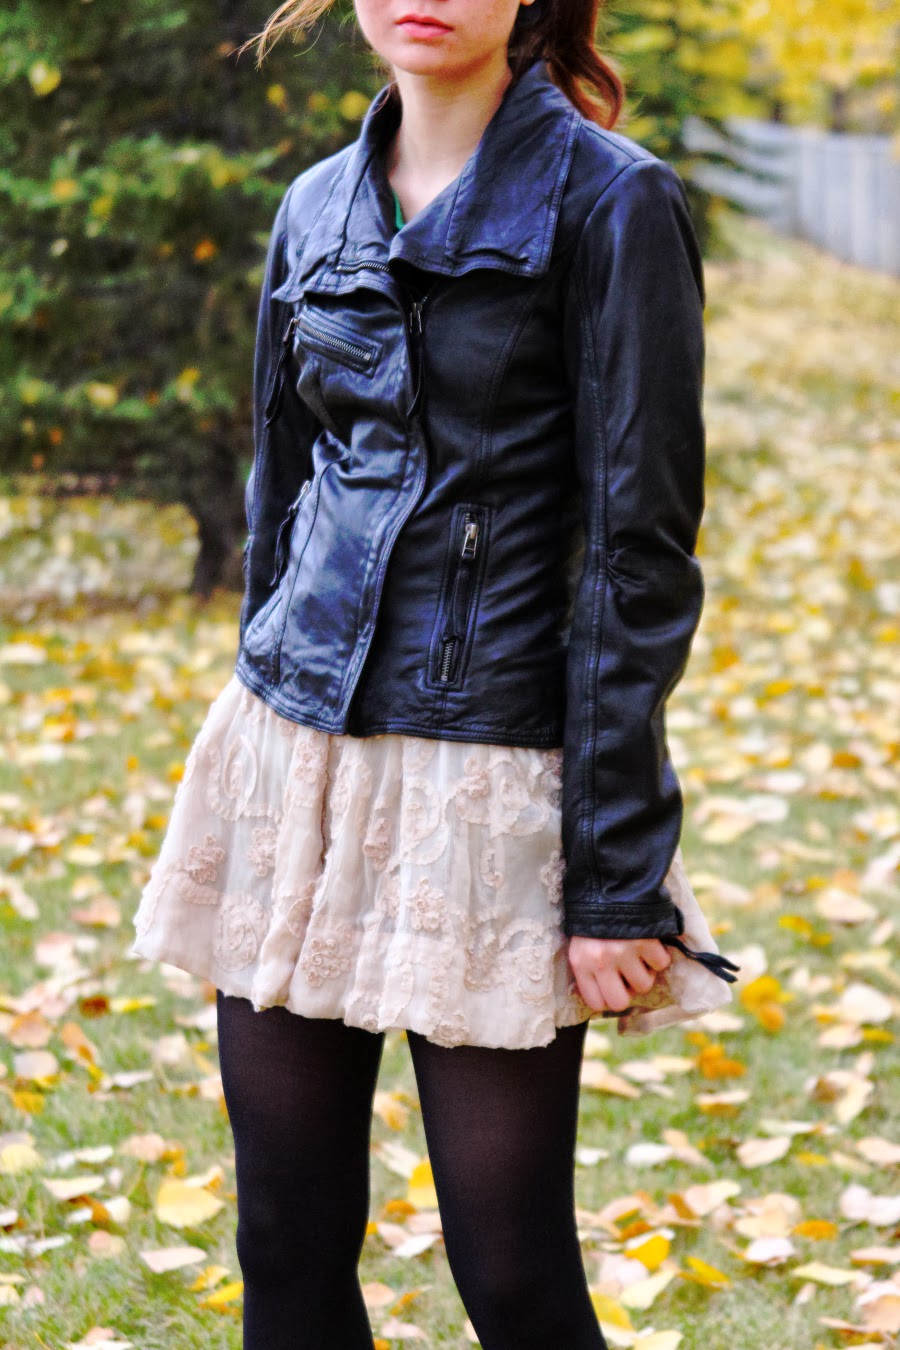 Summer to Fall Fashion, Leather Jacket, Autumn Fashion, Danier, Steve Madden, Forever21, lace and leather